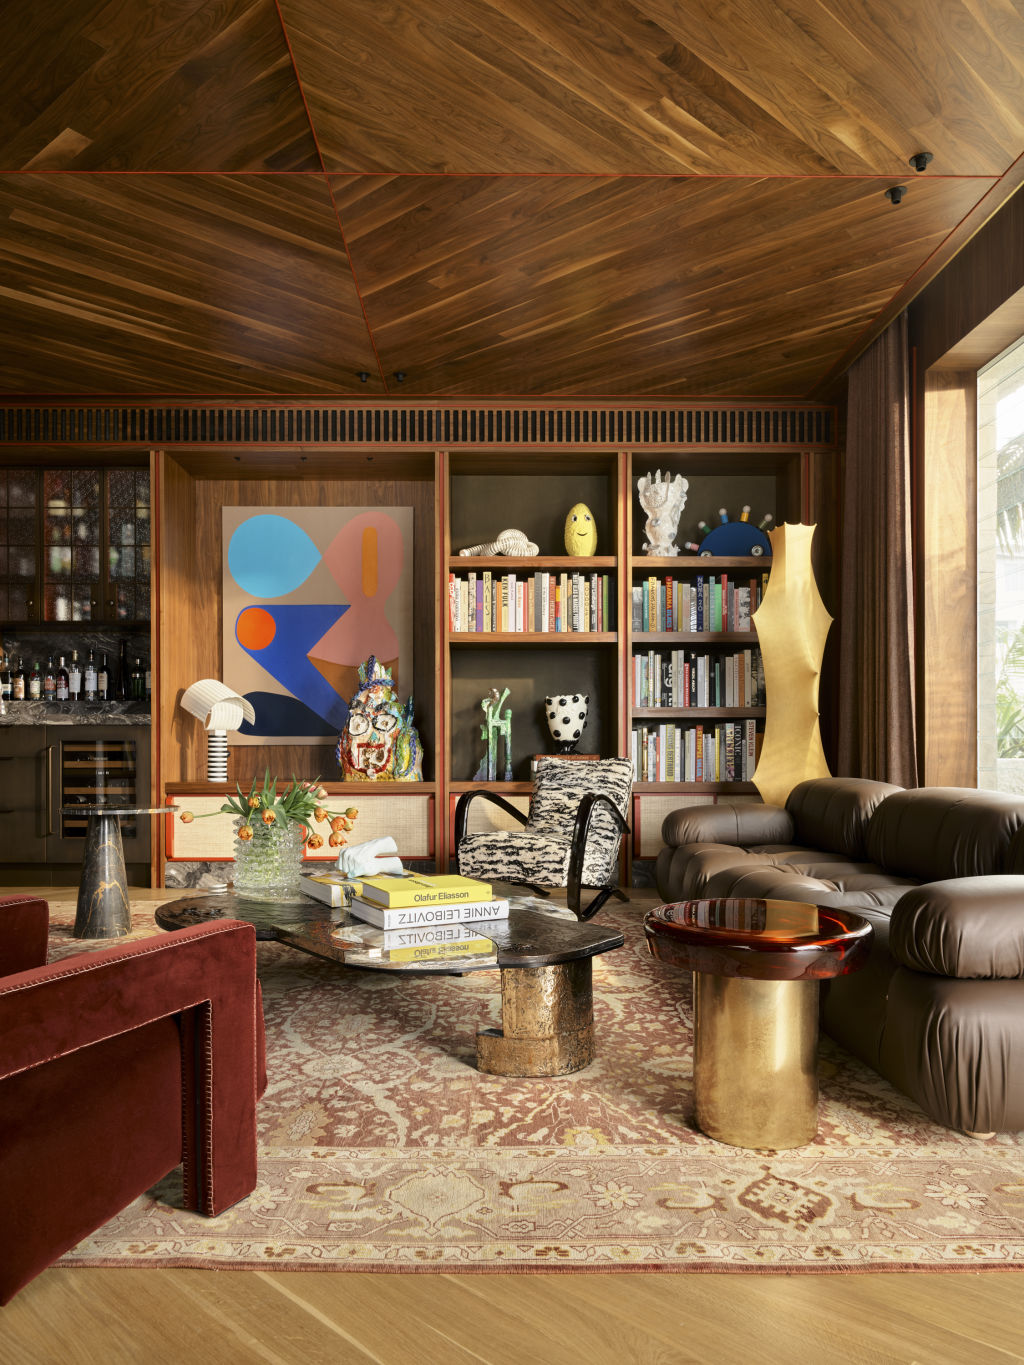 The thoughtful curation of materials allowed each room to develop its distinct persona. Photo: Anson Smart